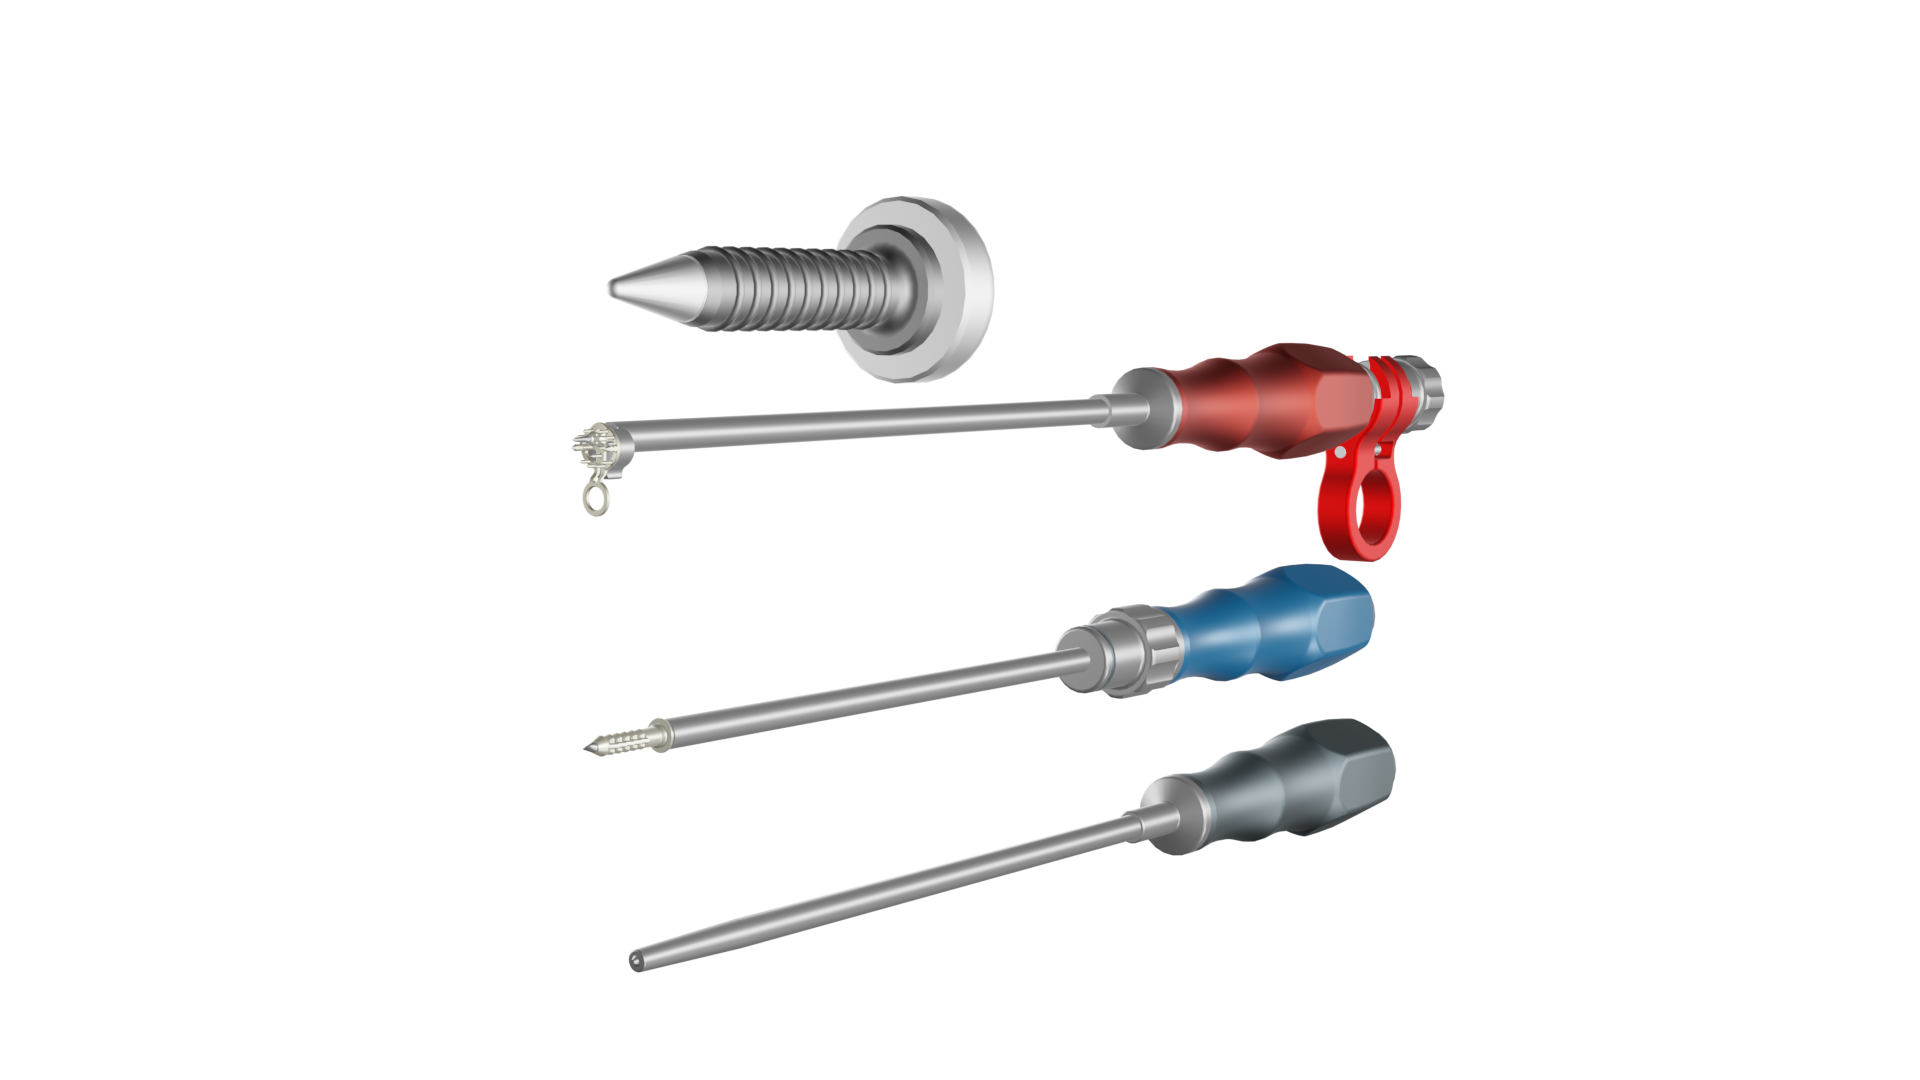 Instrument set of three screwdrivers with colourful handles and a silver-coloured screw